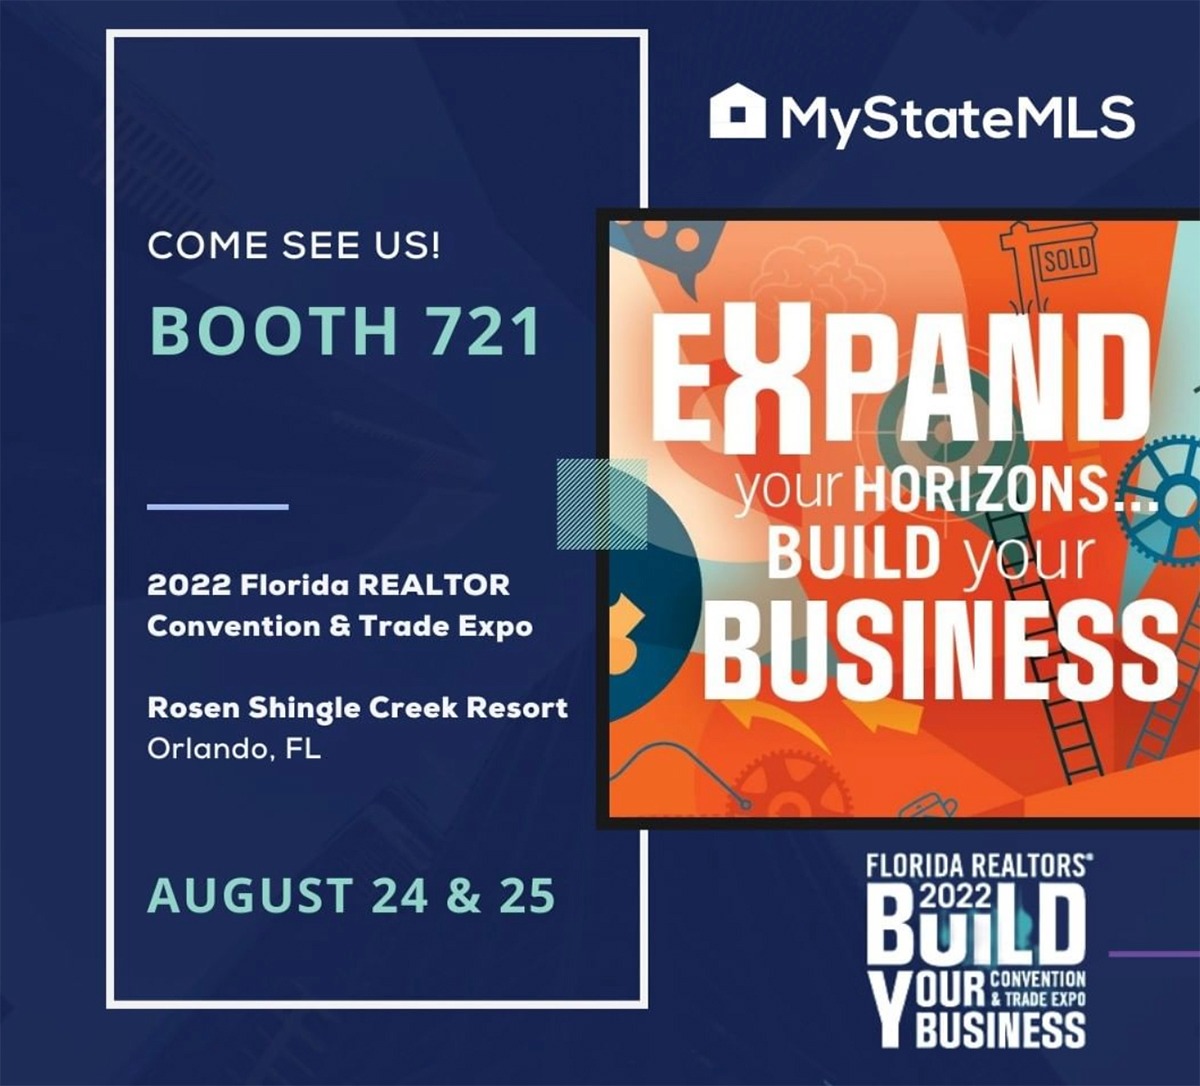 My State MLS Will Be At Florida Realtors Convention & Trade Expo on Aug